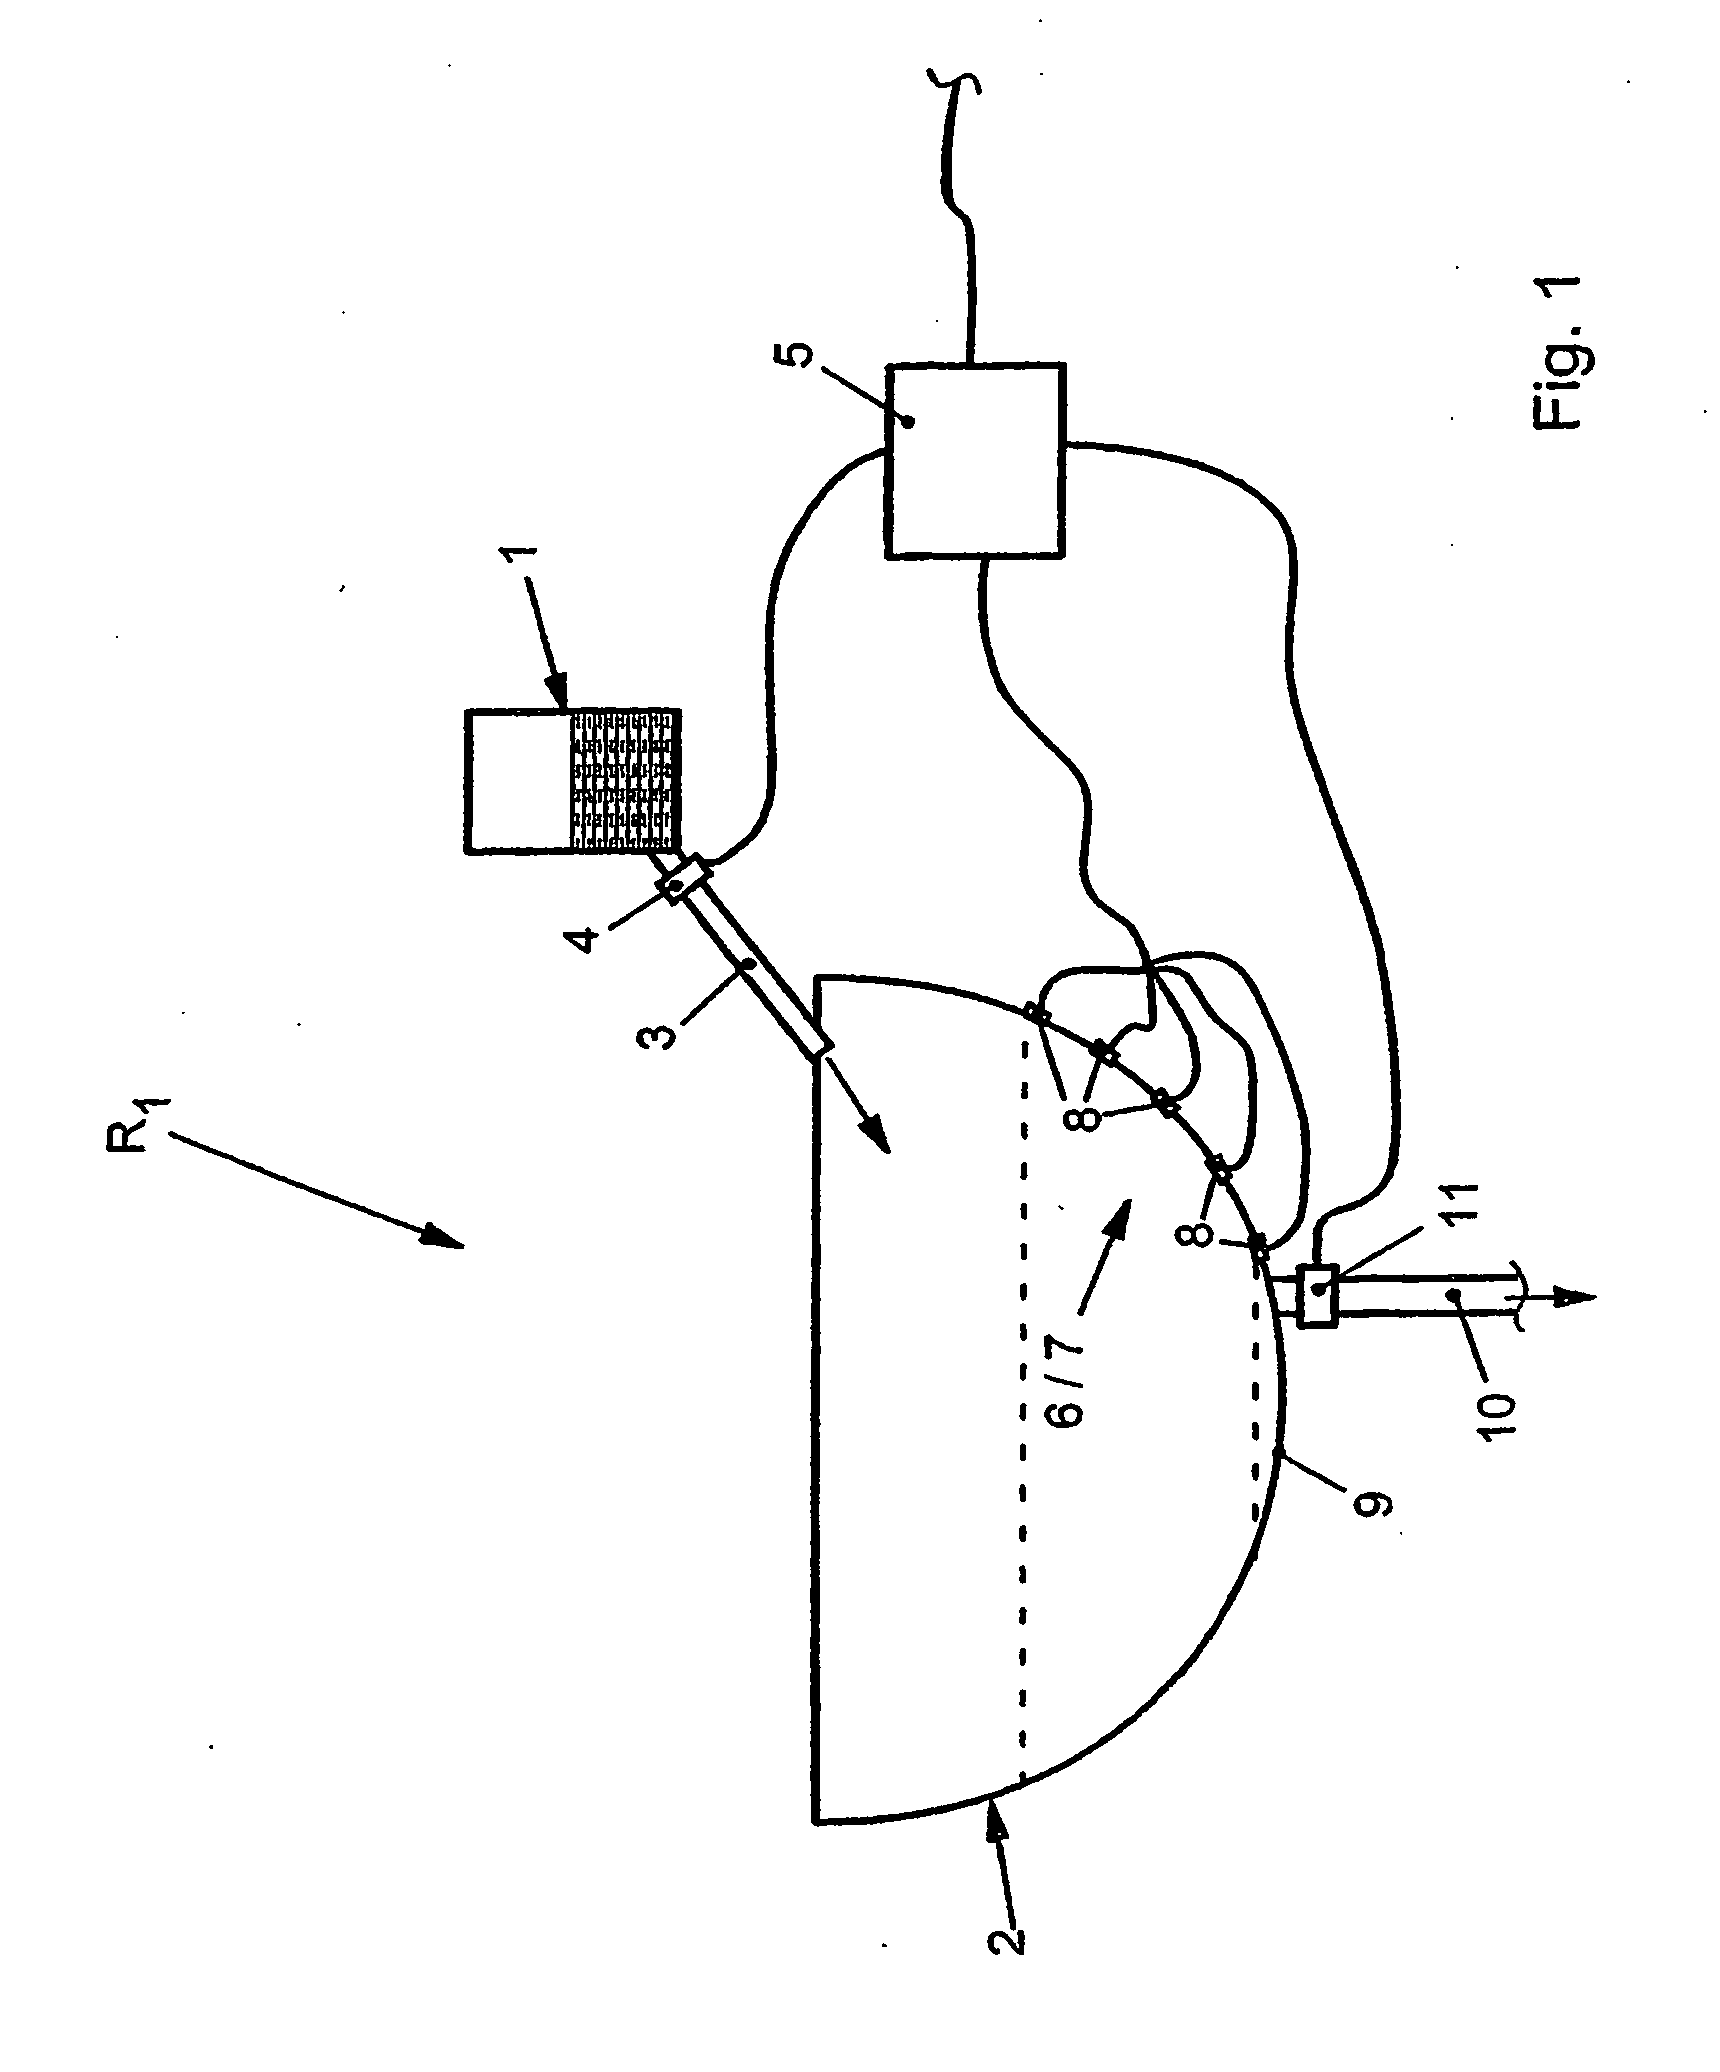 Method for determining a quantity of liquid nutriments consumed by animals